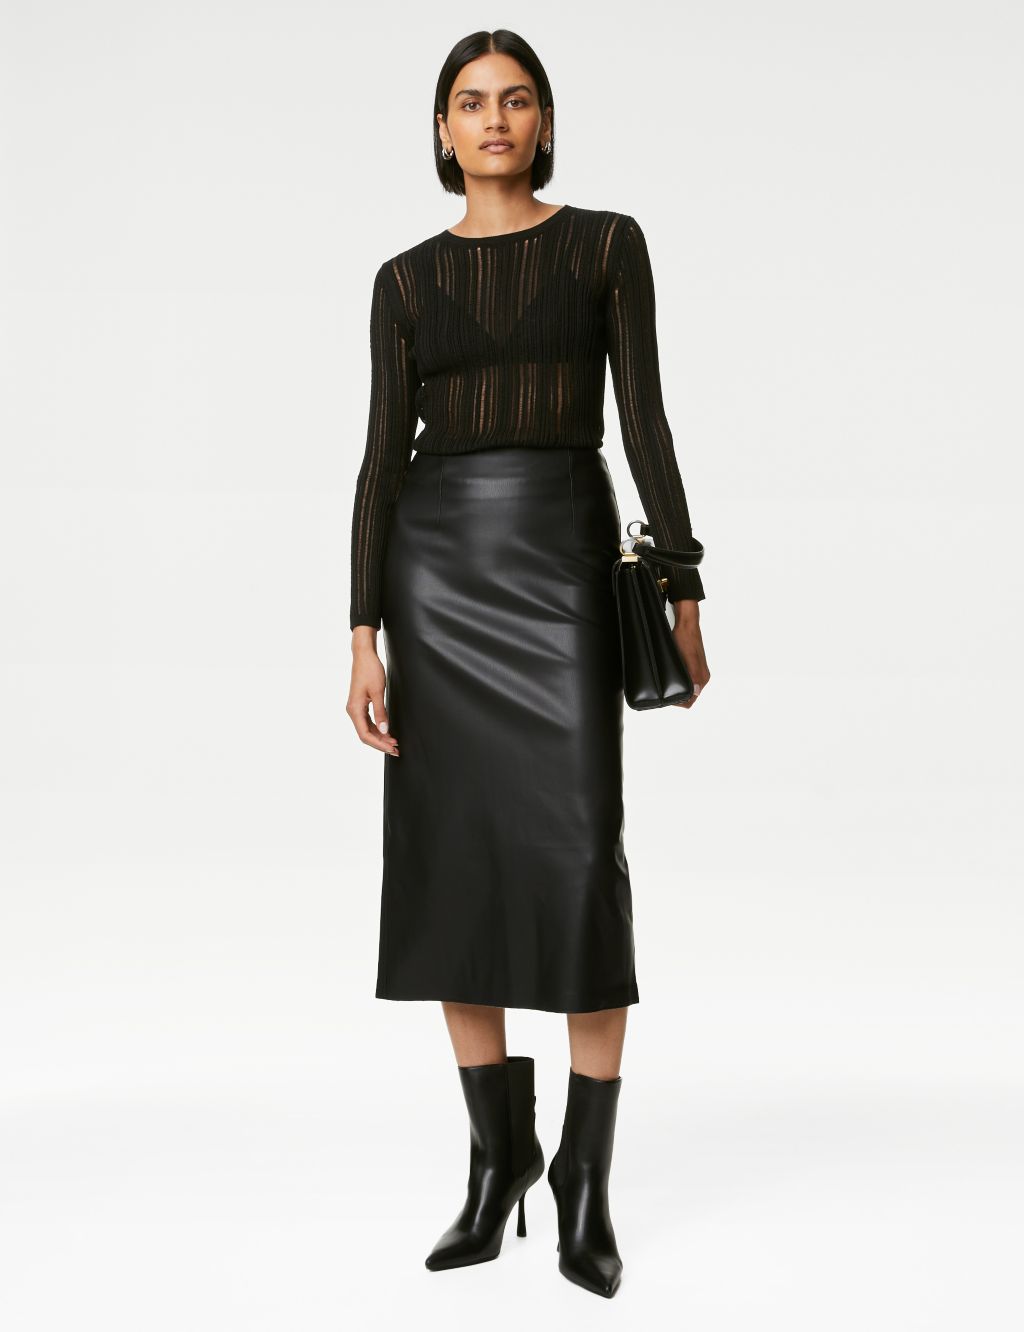 Leather Look Midaxi Pencil Skirt | M&S Collection | M&S